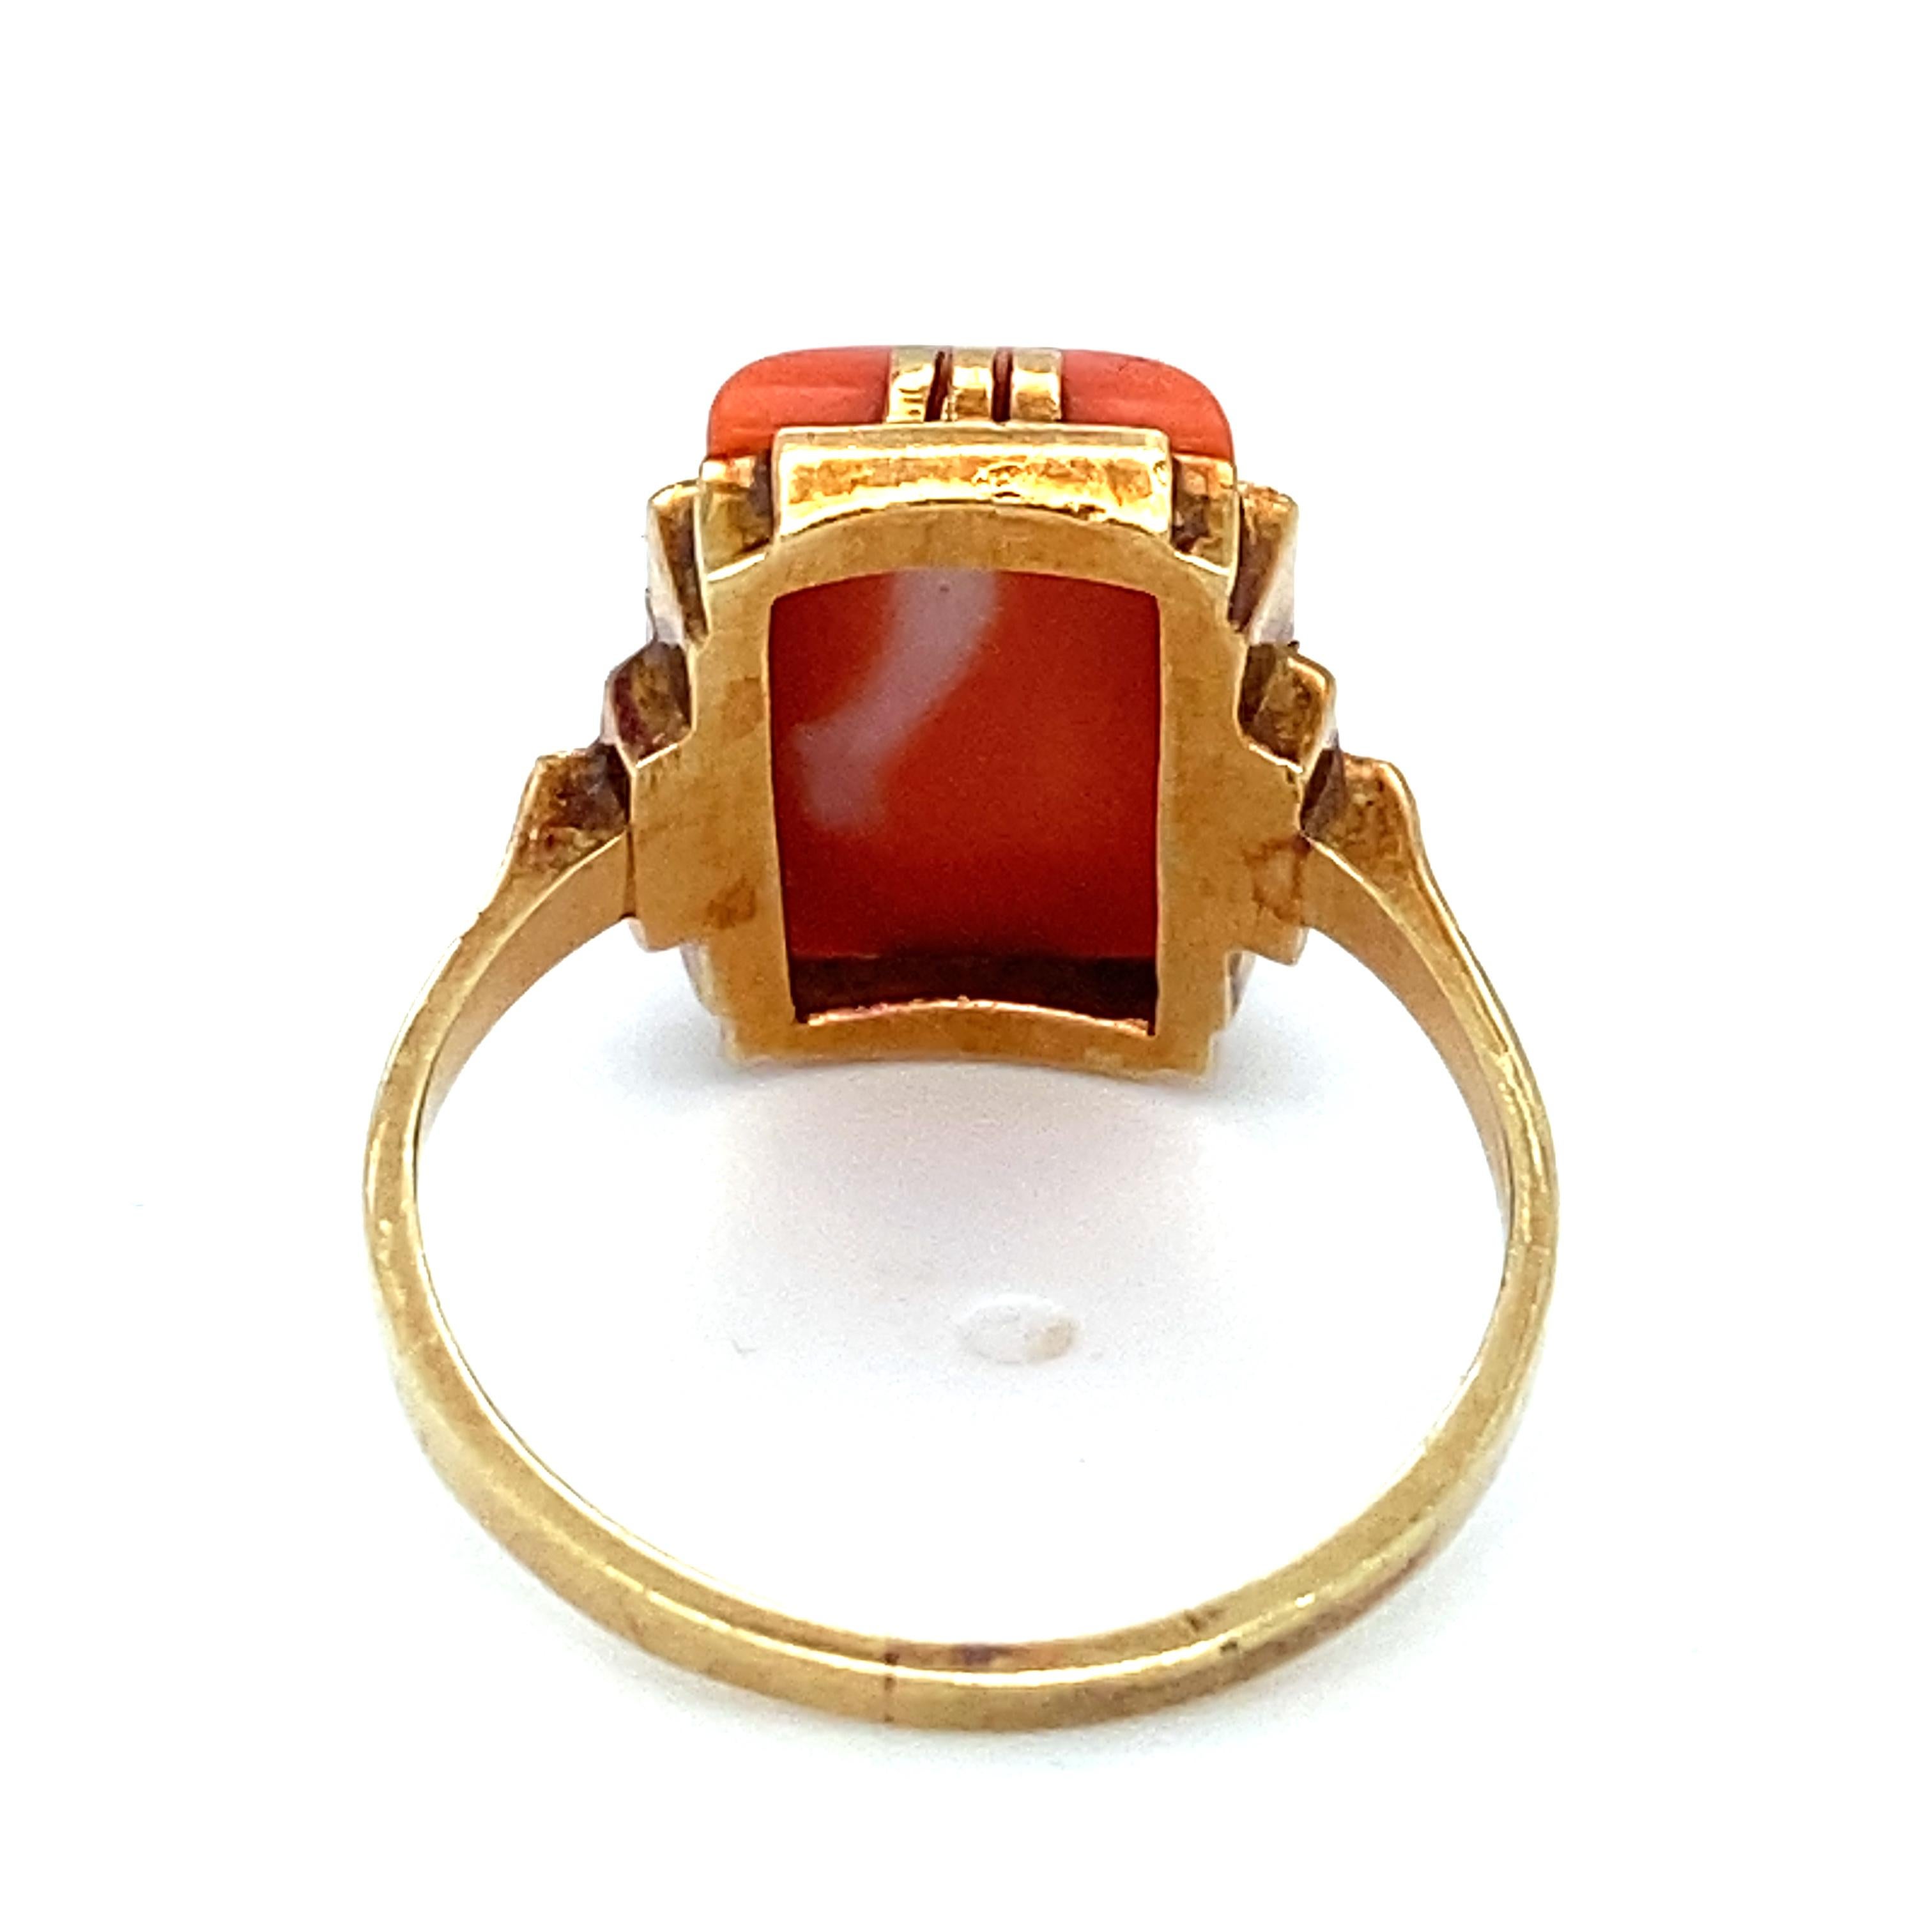 Item Details: This beautiful ring has a vibrant orange coral stone and is crafted in a unique Art Deco design. The hues of orange coral and yellow gold give it a beautiful finish. 

Circa: 1940s
Metal Type: 14 Karat Yellow Gold
Weight: 3.8